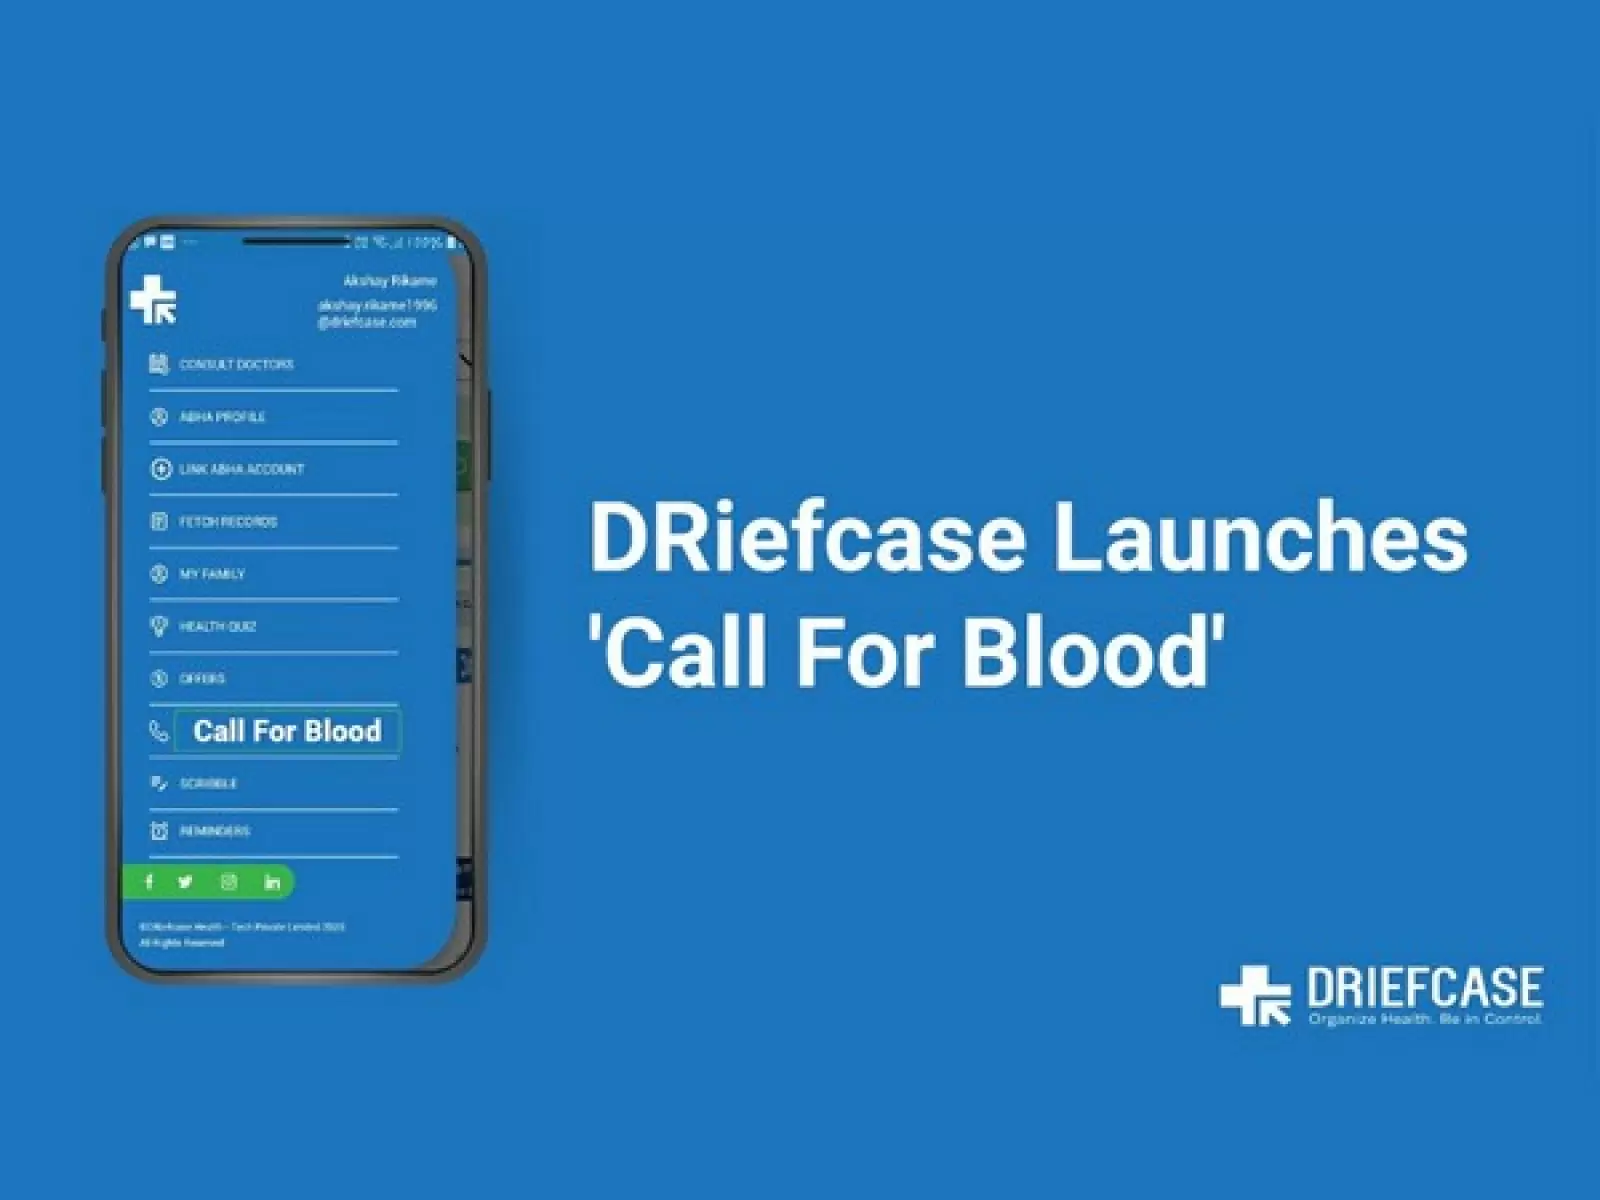 DRiefcase Launches 'Call for Blood' Feature to Connect Blood Donors with Patients in Need